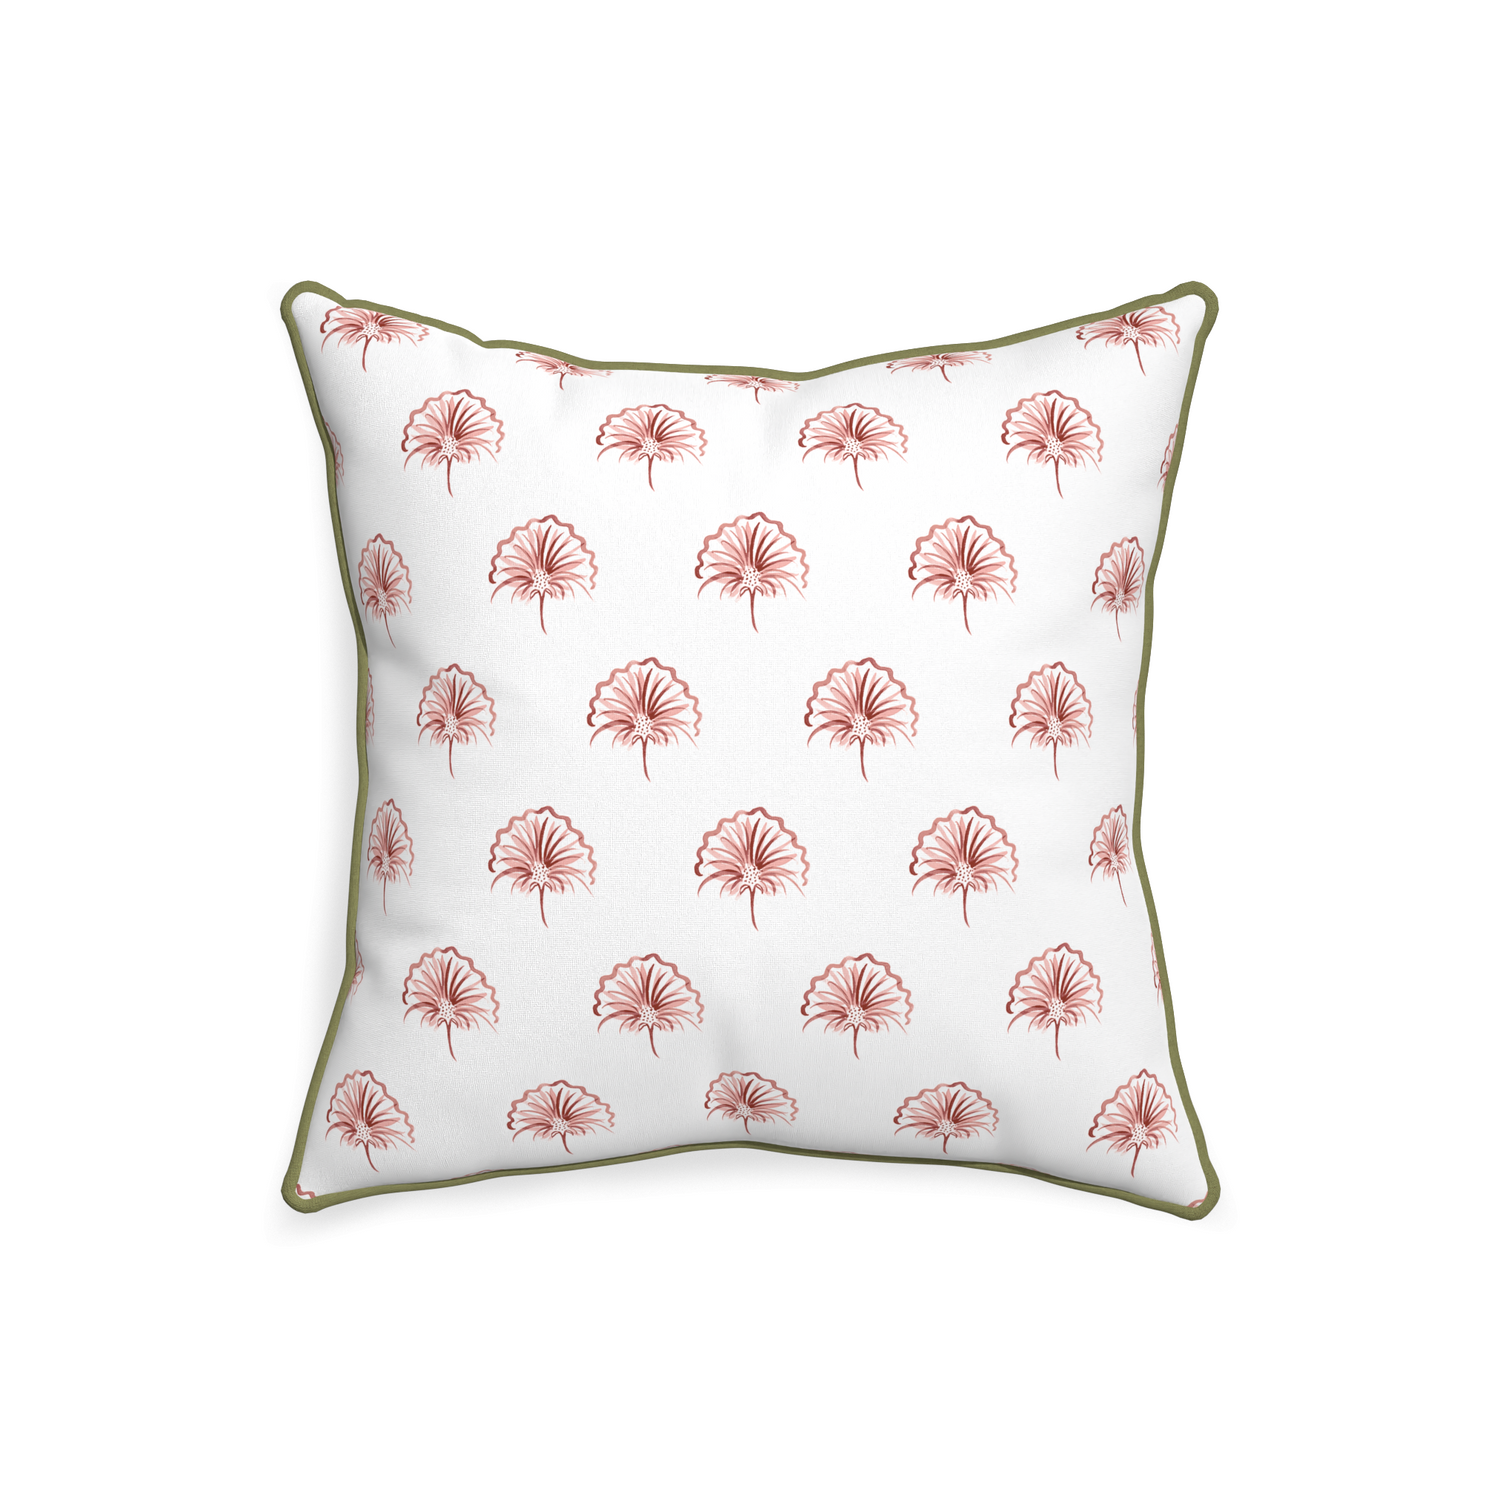 20-square penelope rose custom floral pinkpillow with moss piping on white background